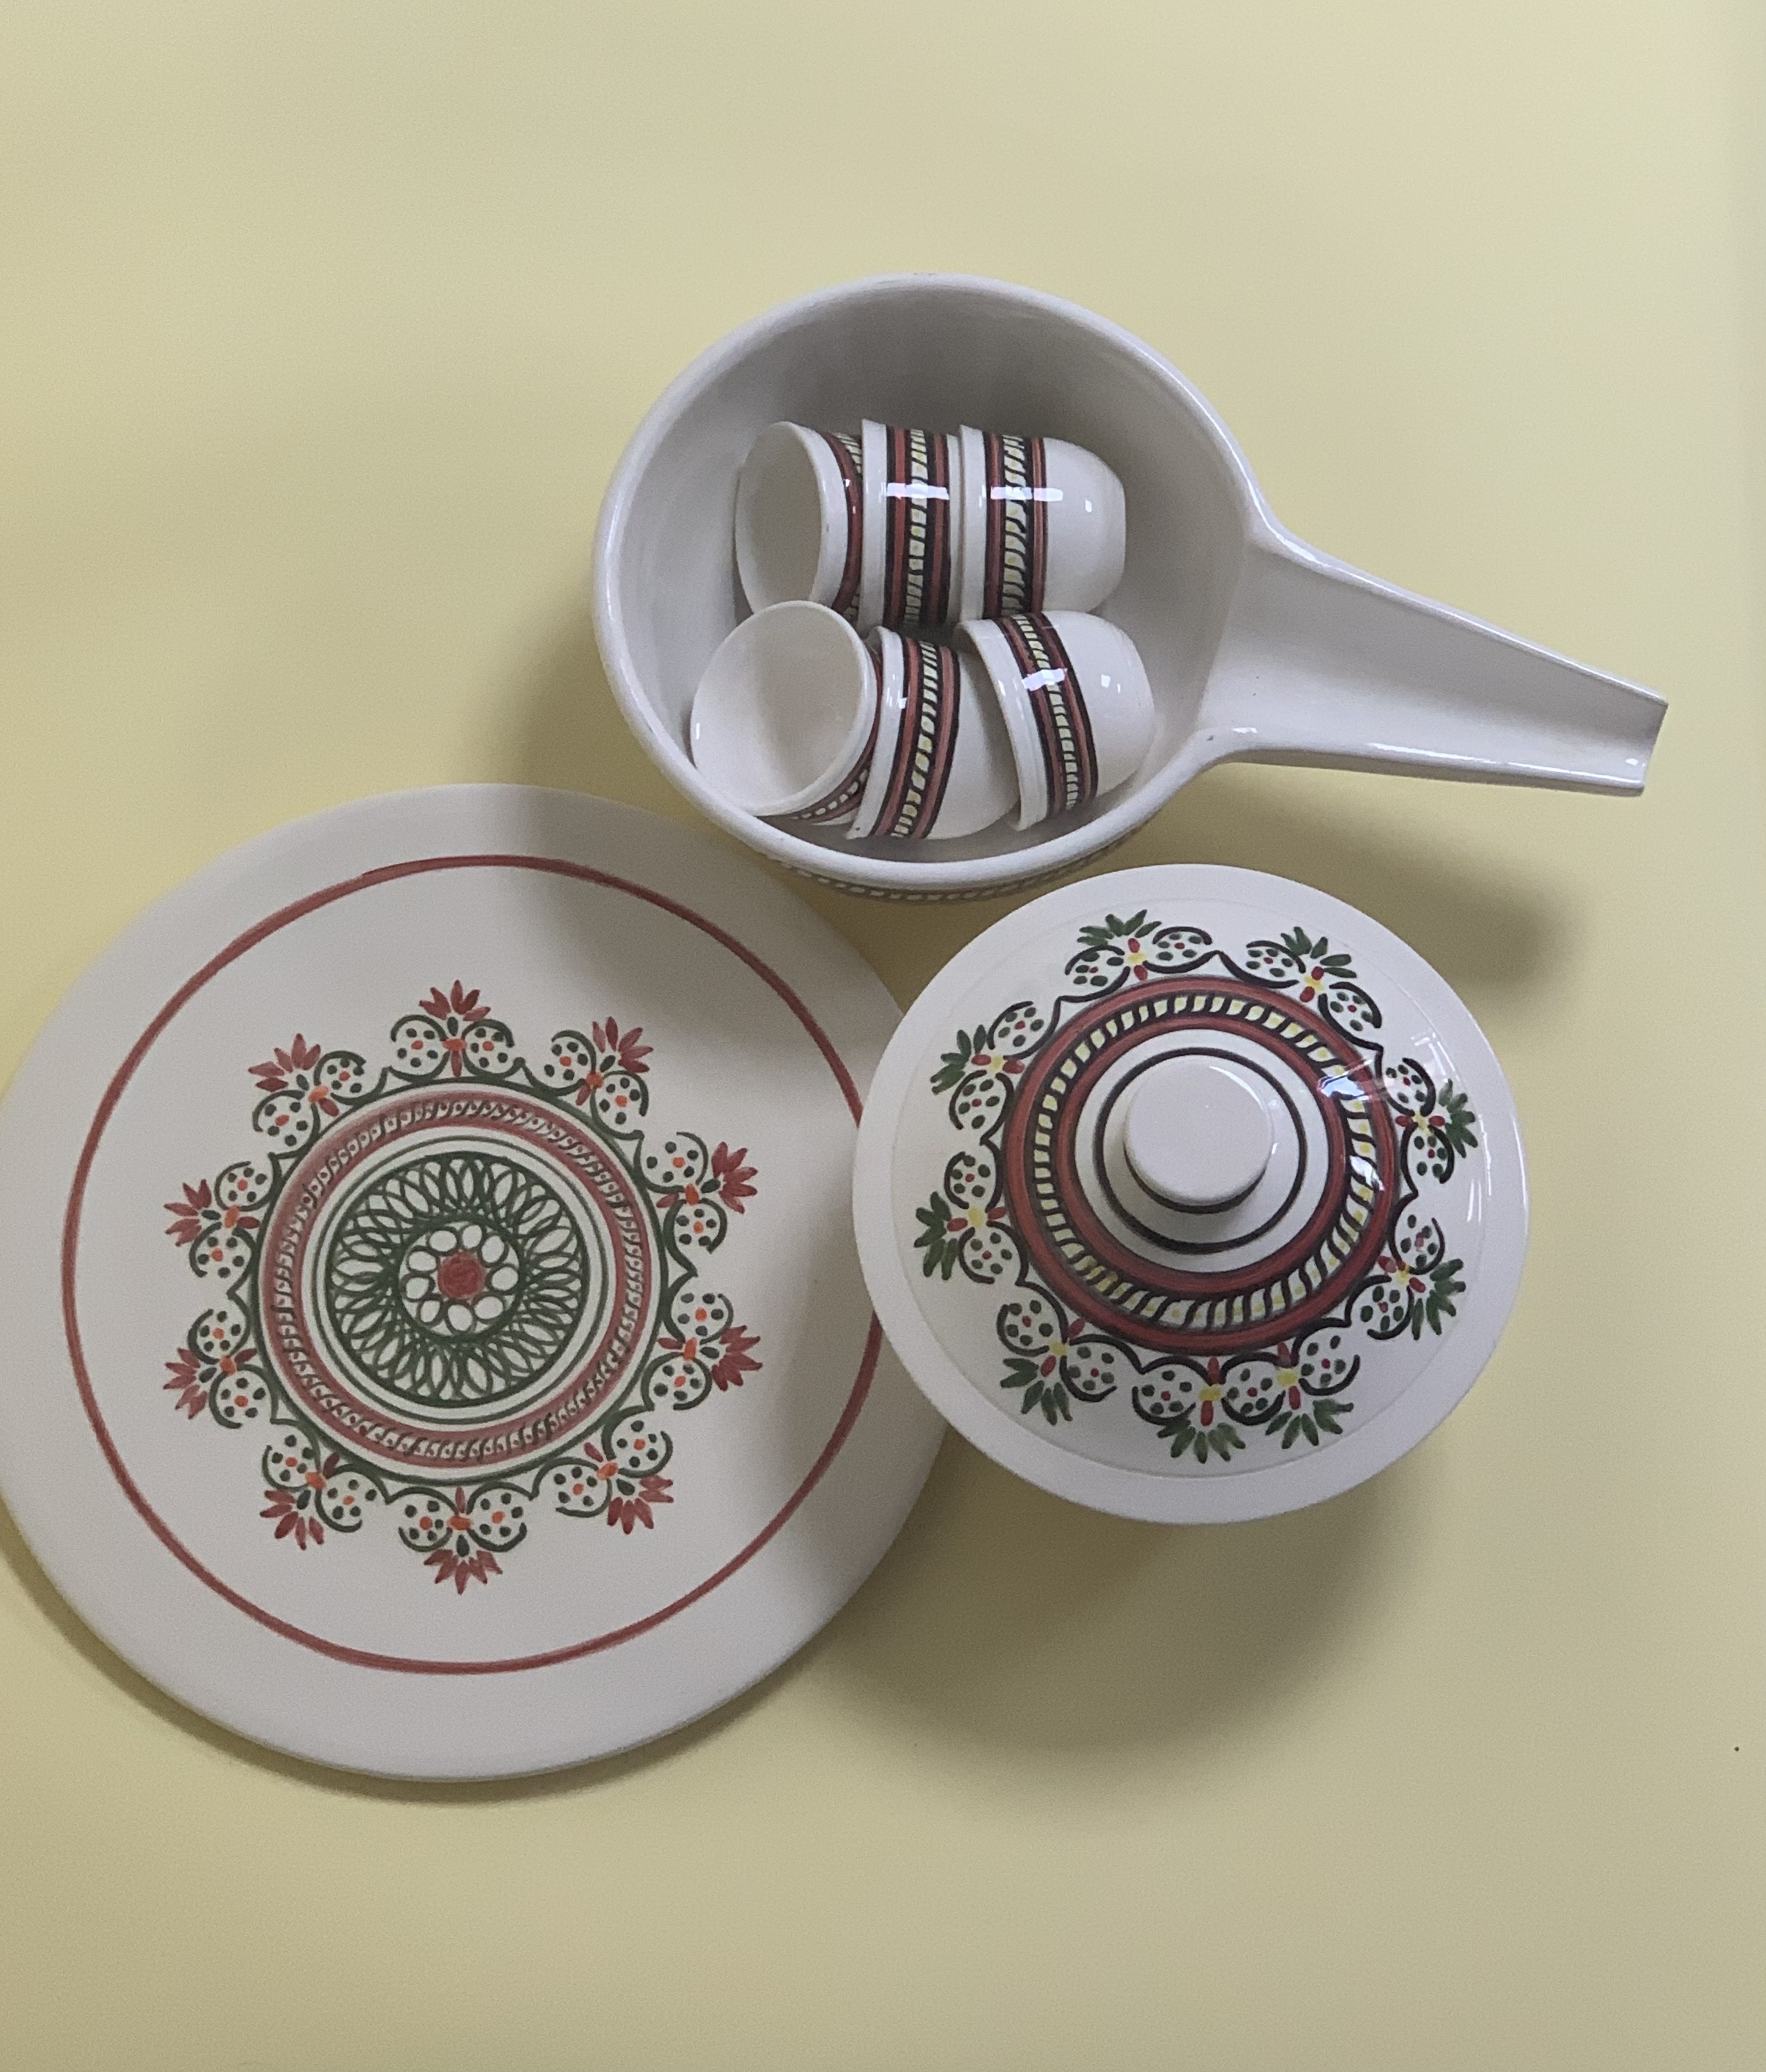 A handcrafted pottery set